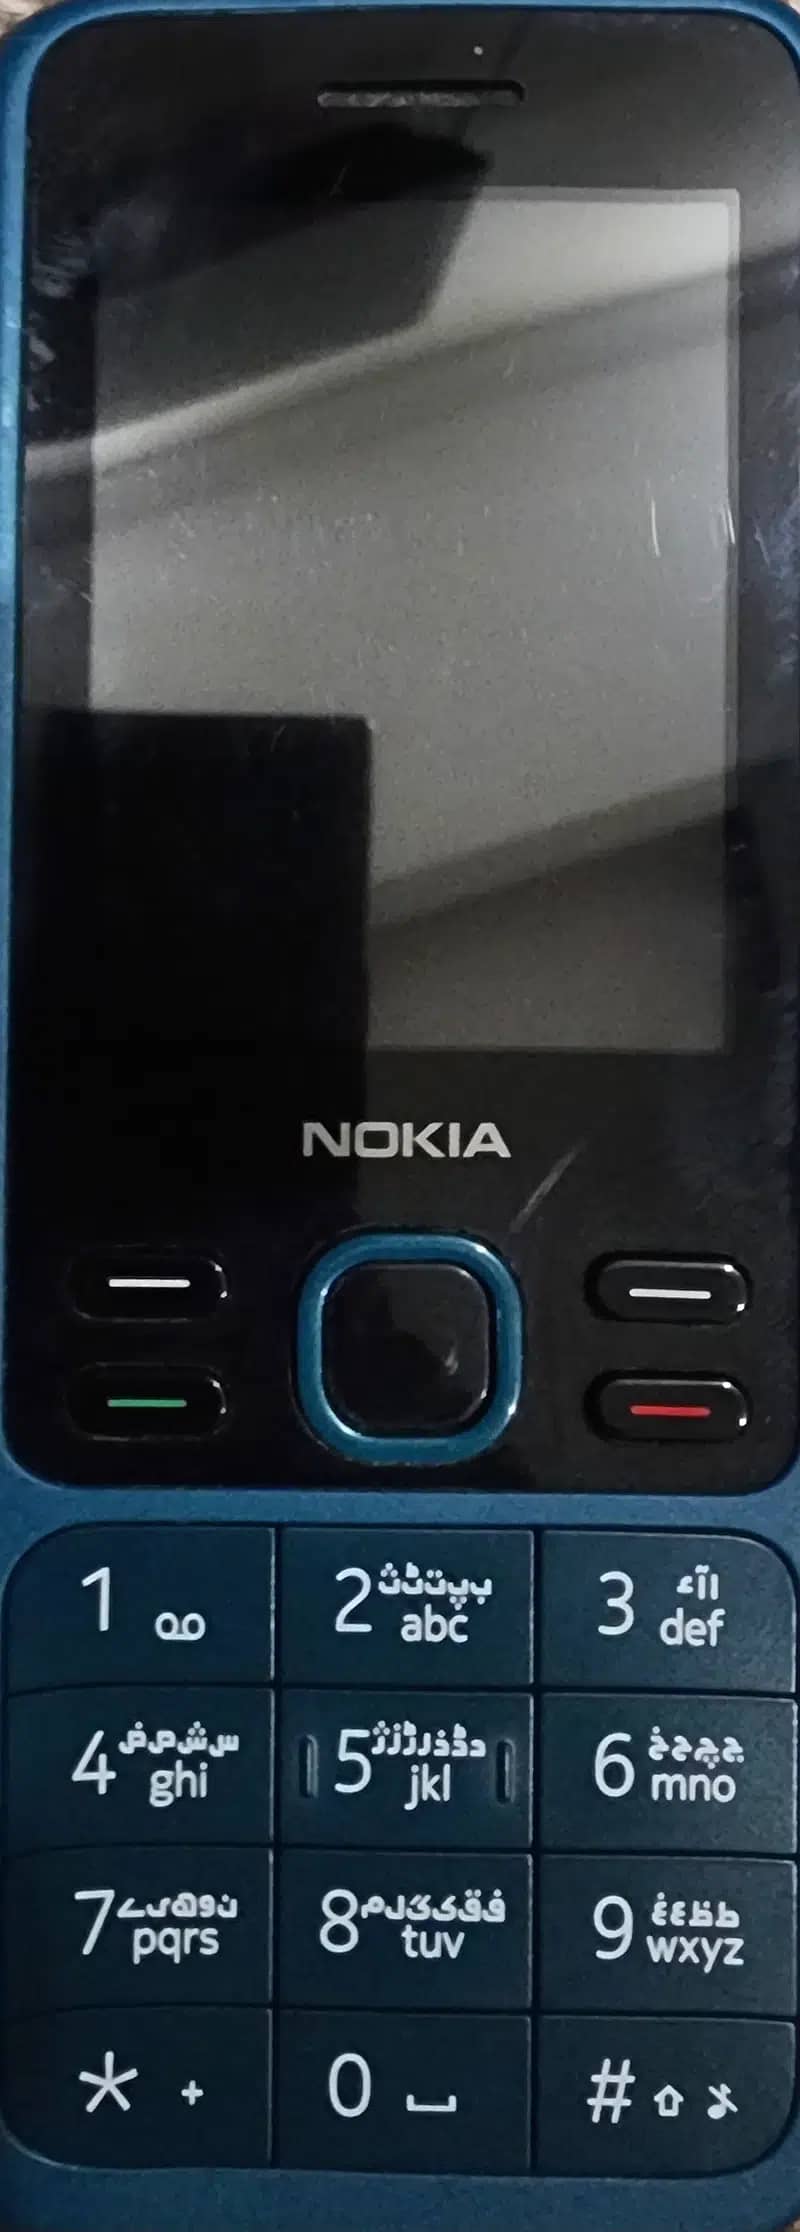 Nokia 150 2020 With All Assesories Like New Condition 1